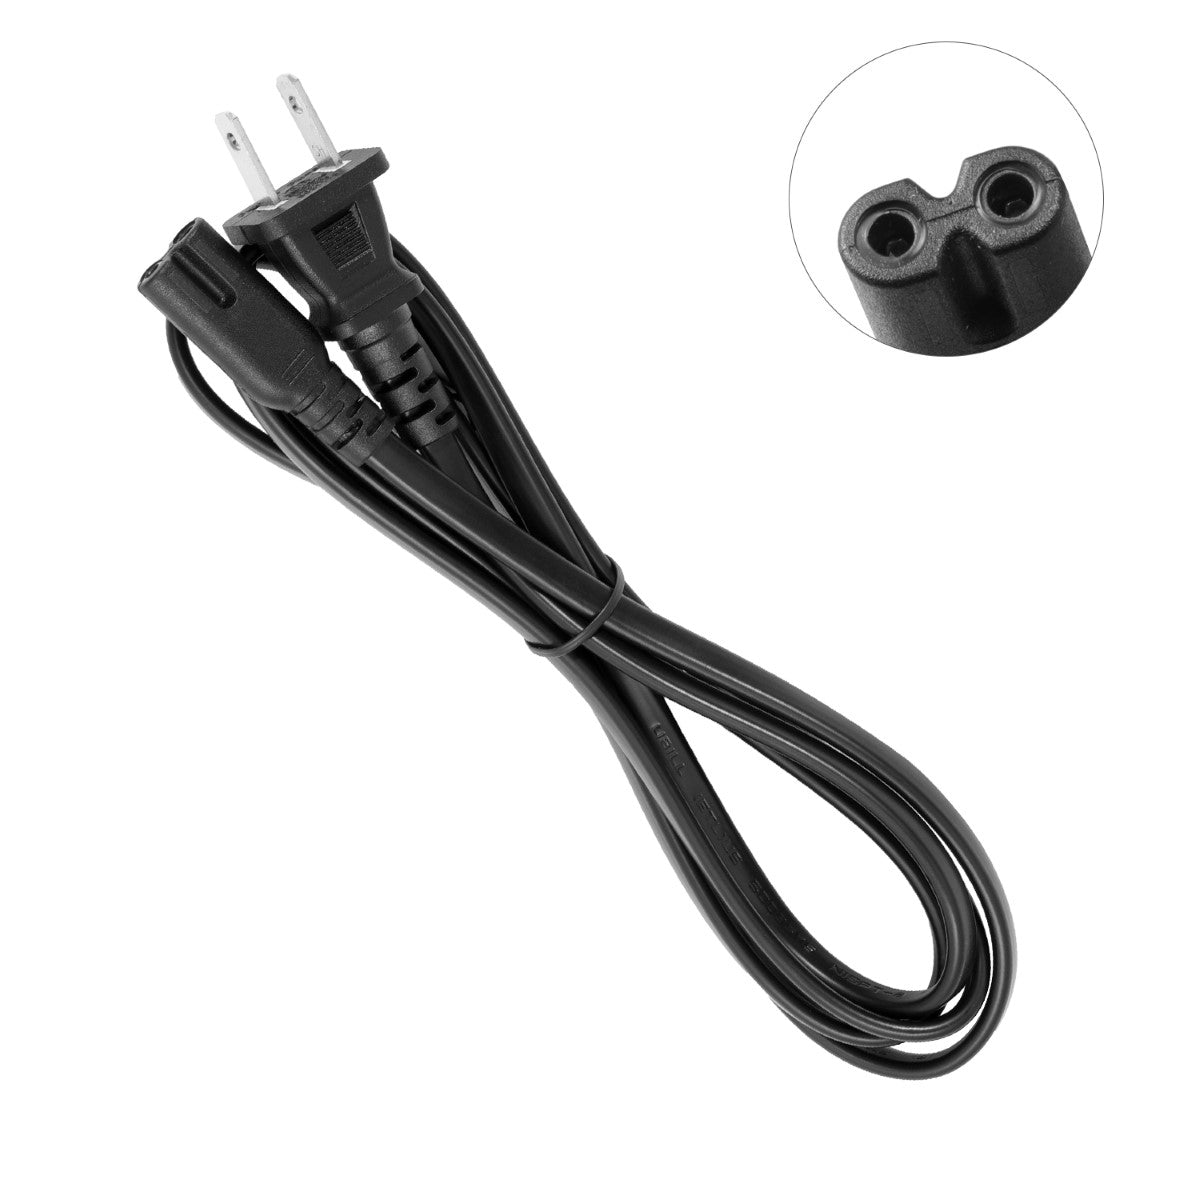 Power Cord for HP ENVY 5663 e-All-in-One Printer.